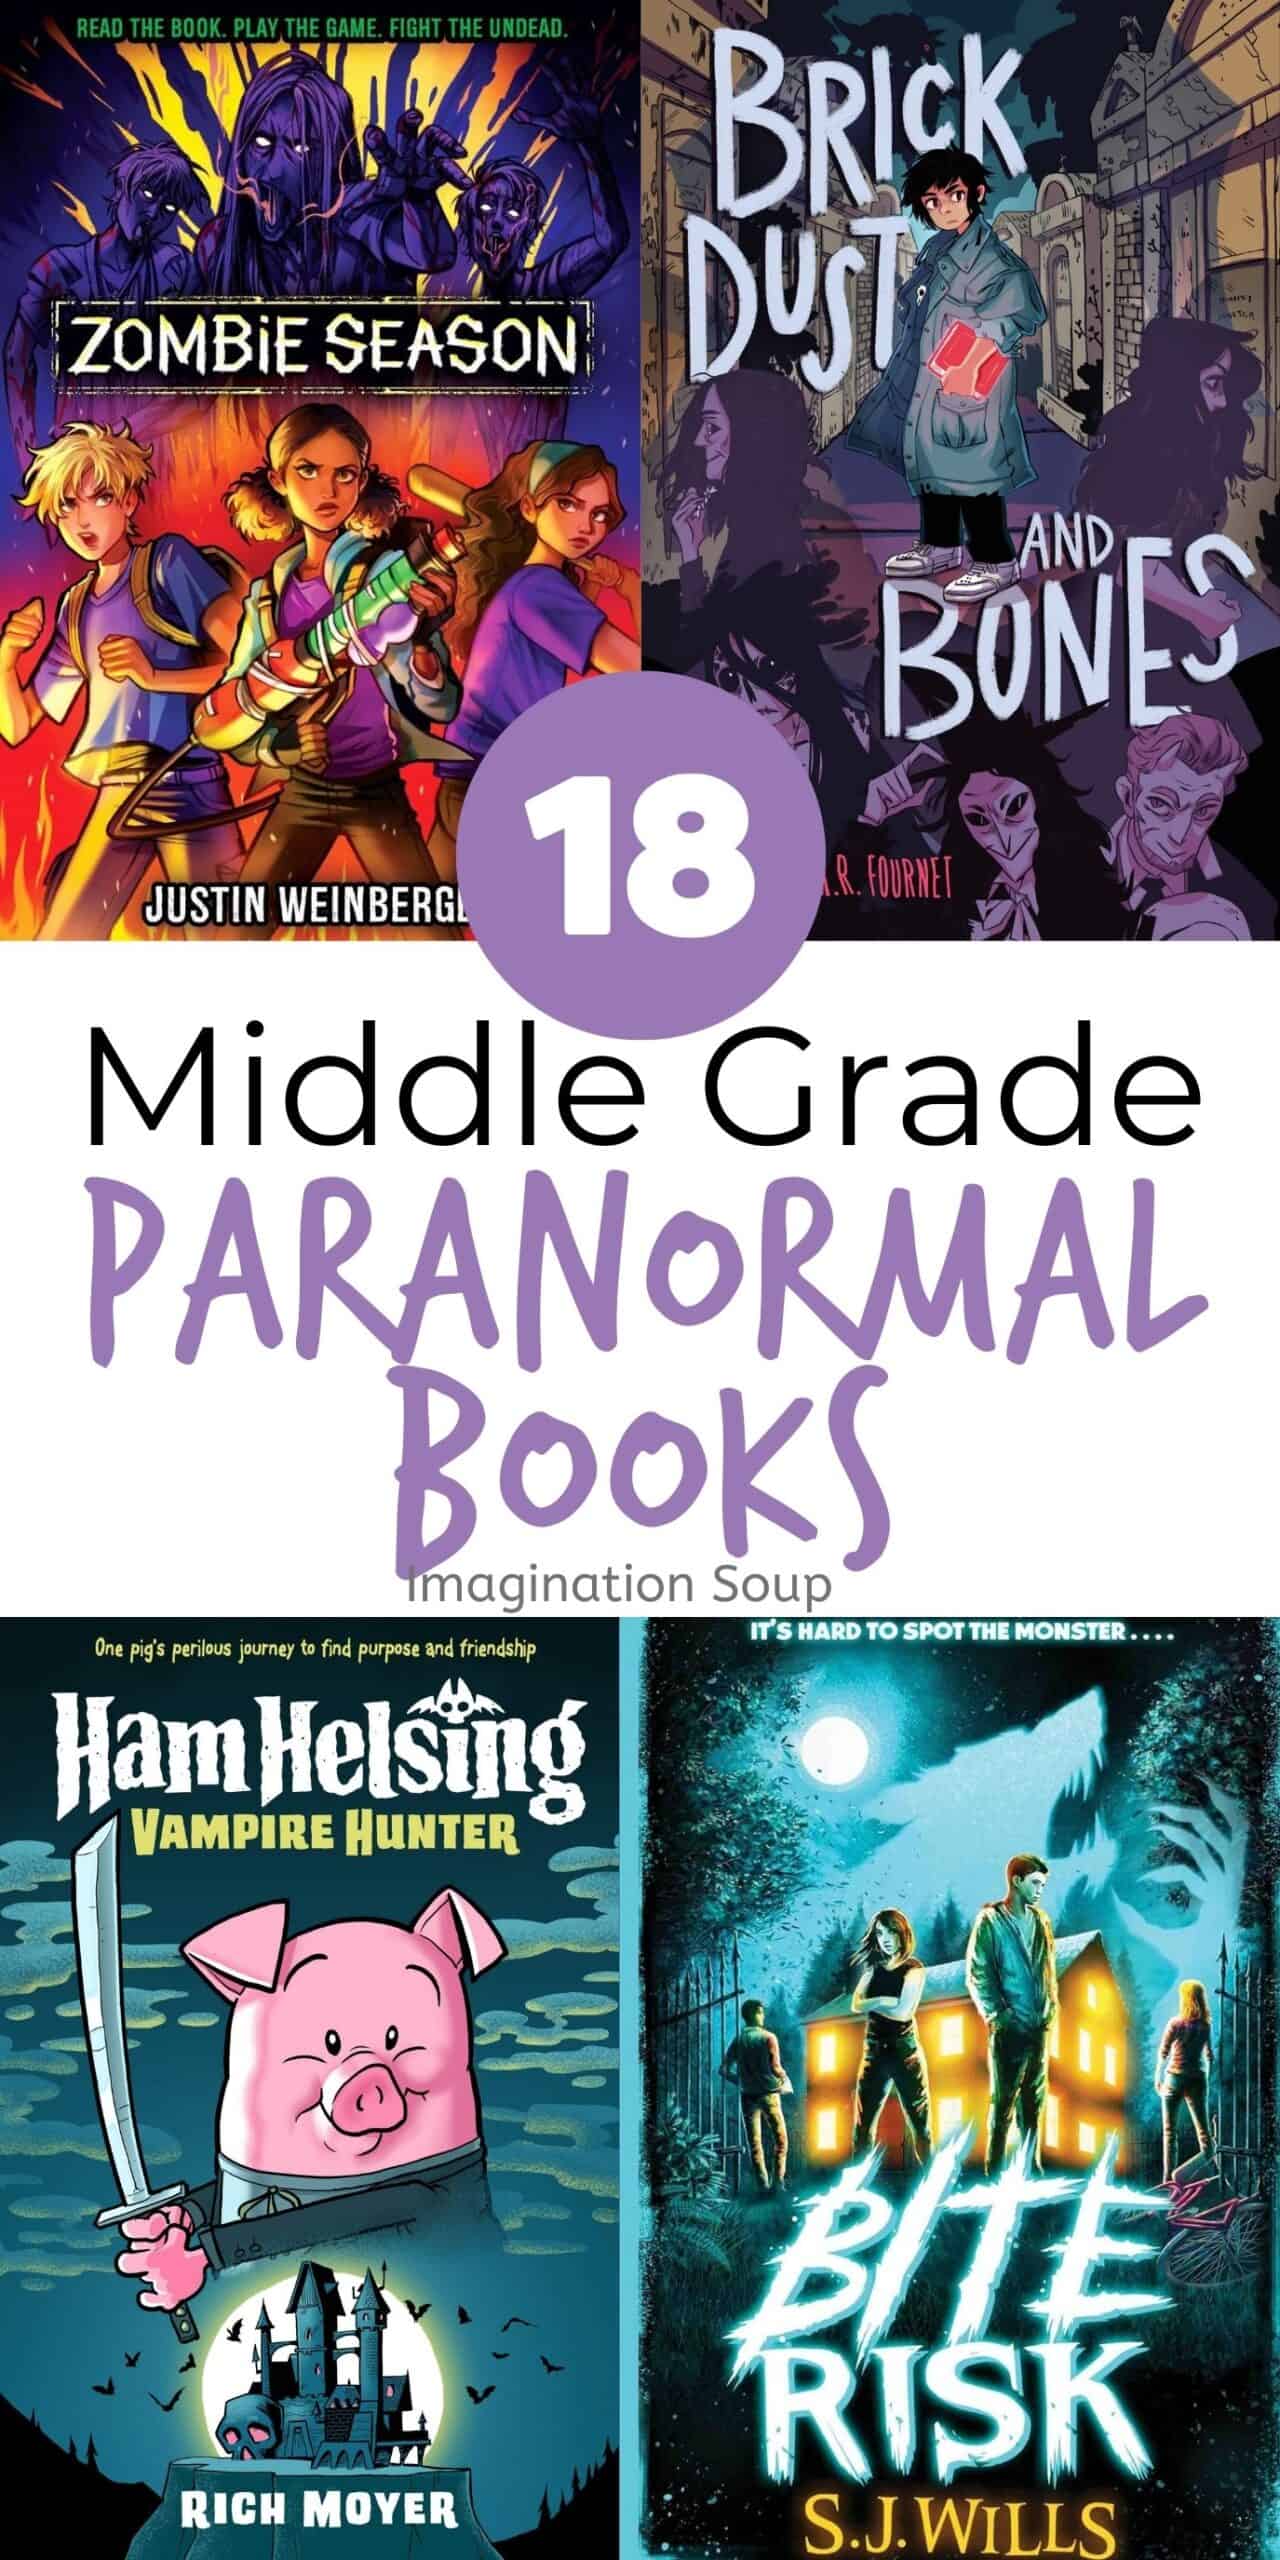 Middle Grade Paranormal Books